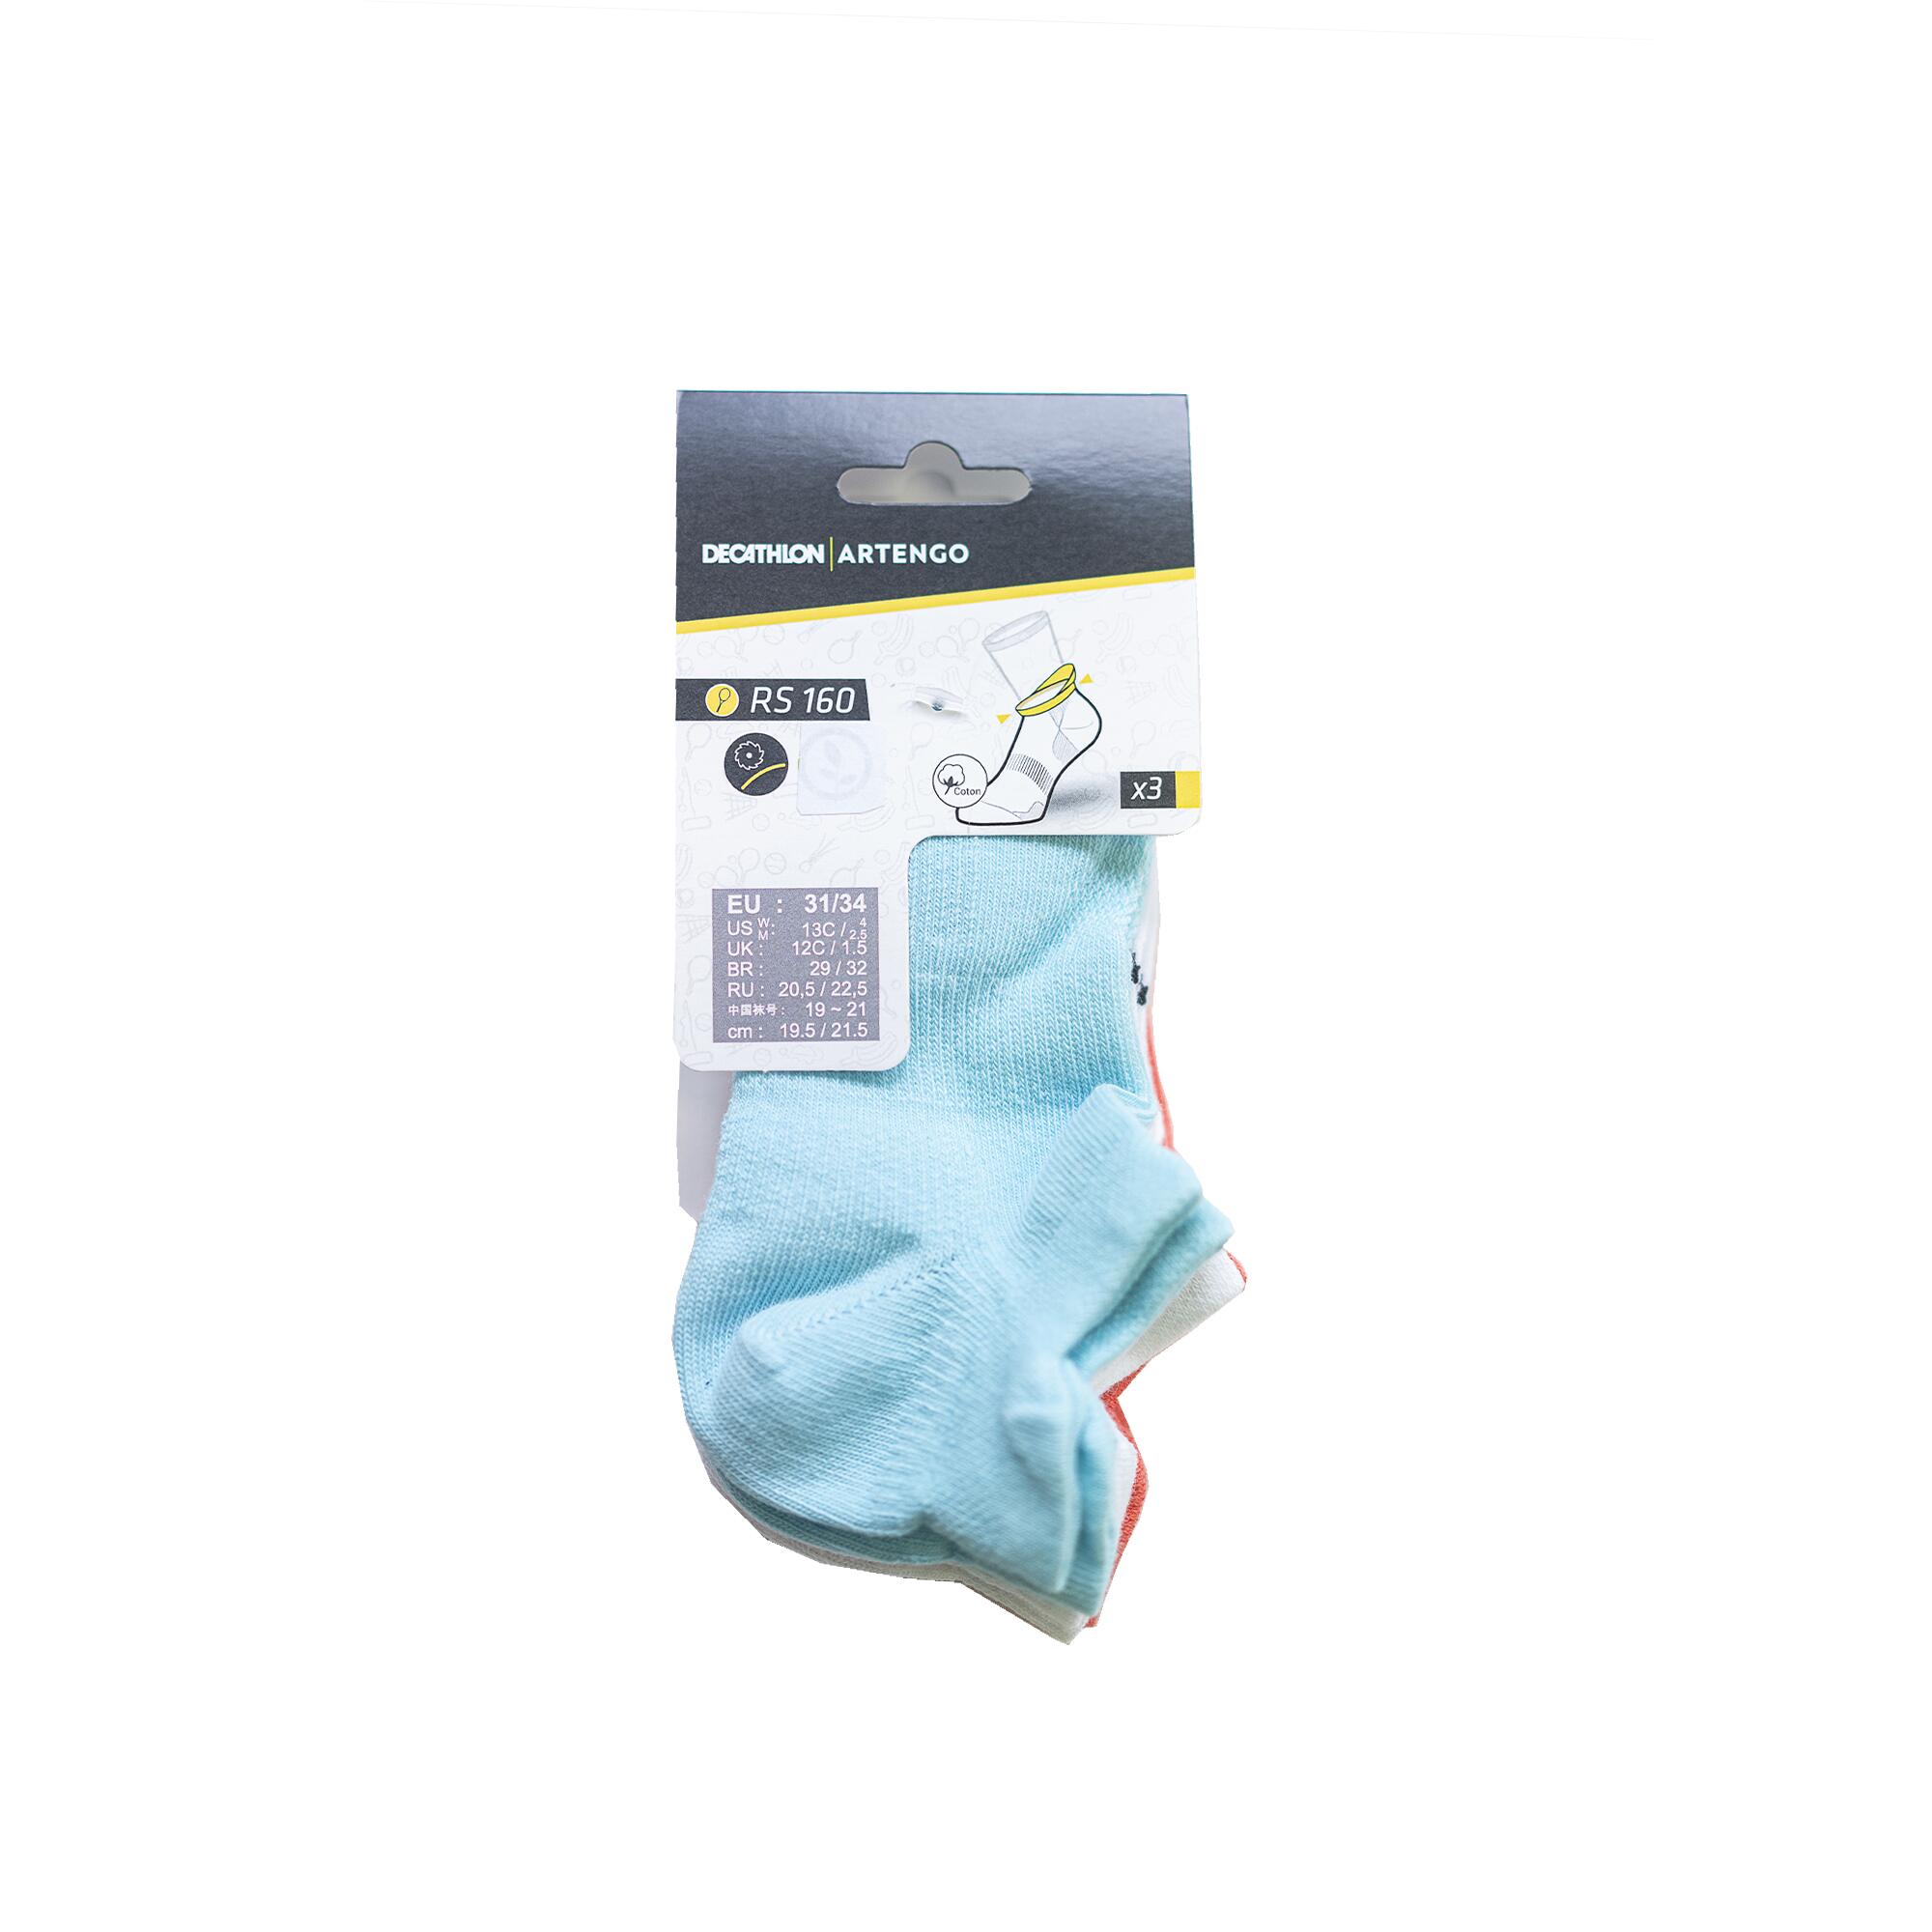 Kids' Low Sports Socks Tri-Pack RS 160 - Blue/White/Coral 6/6